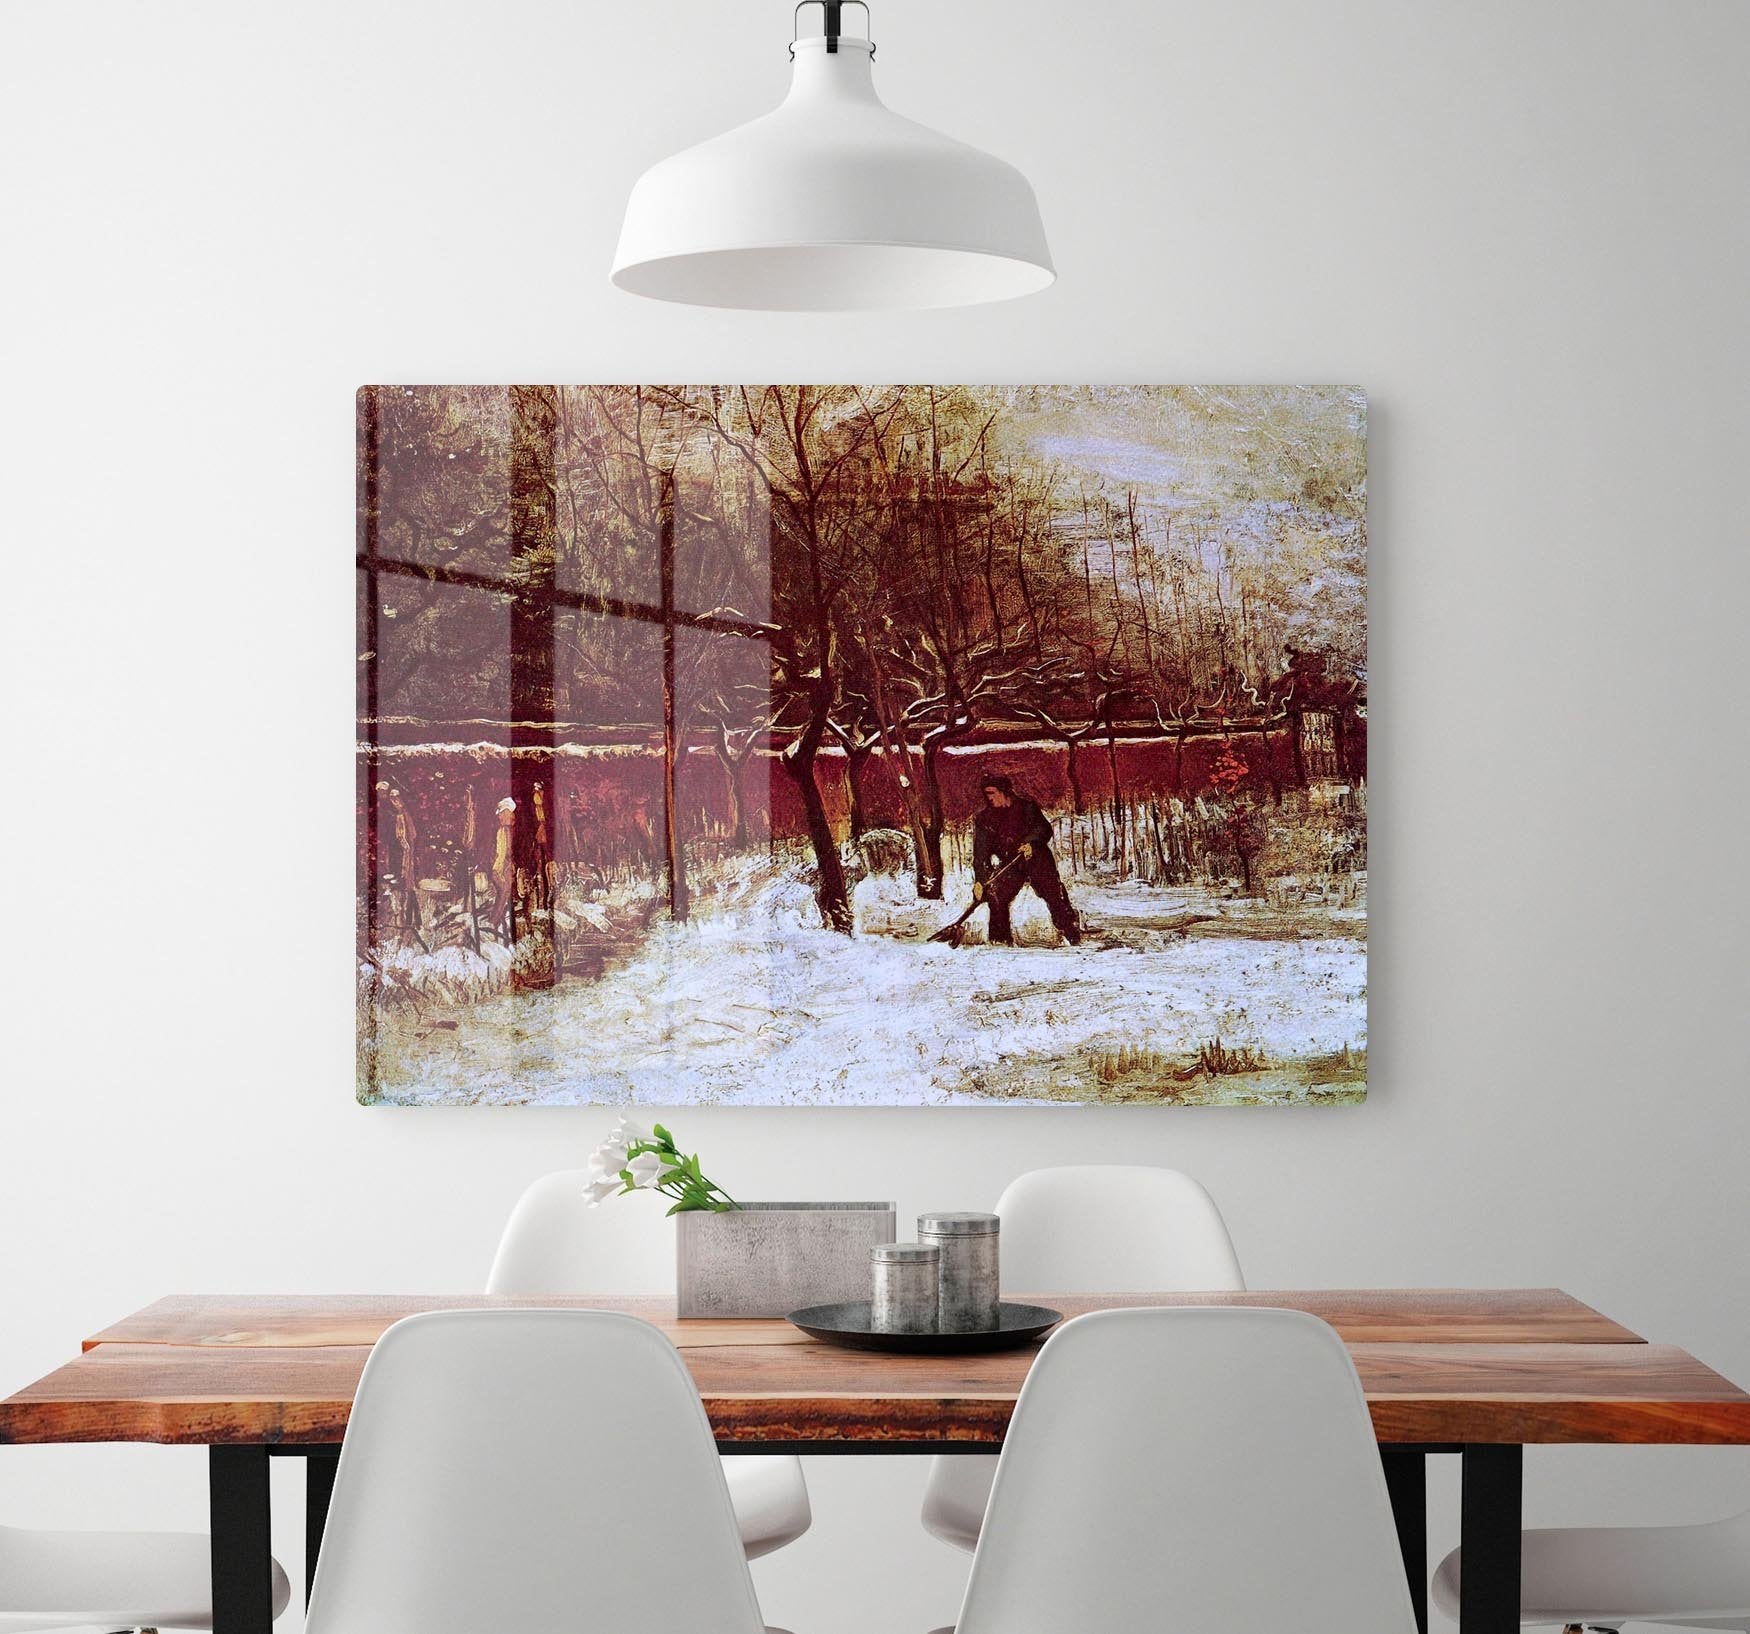 The Parsonage Garden at Nuenen in the Snow by Van Gogh HD Metal Print